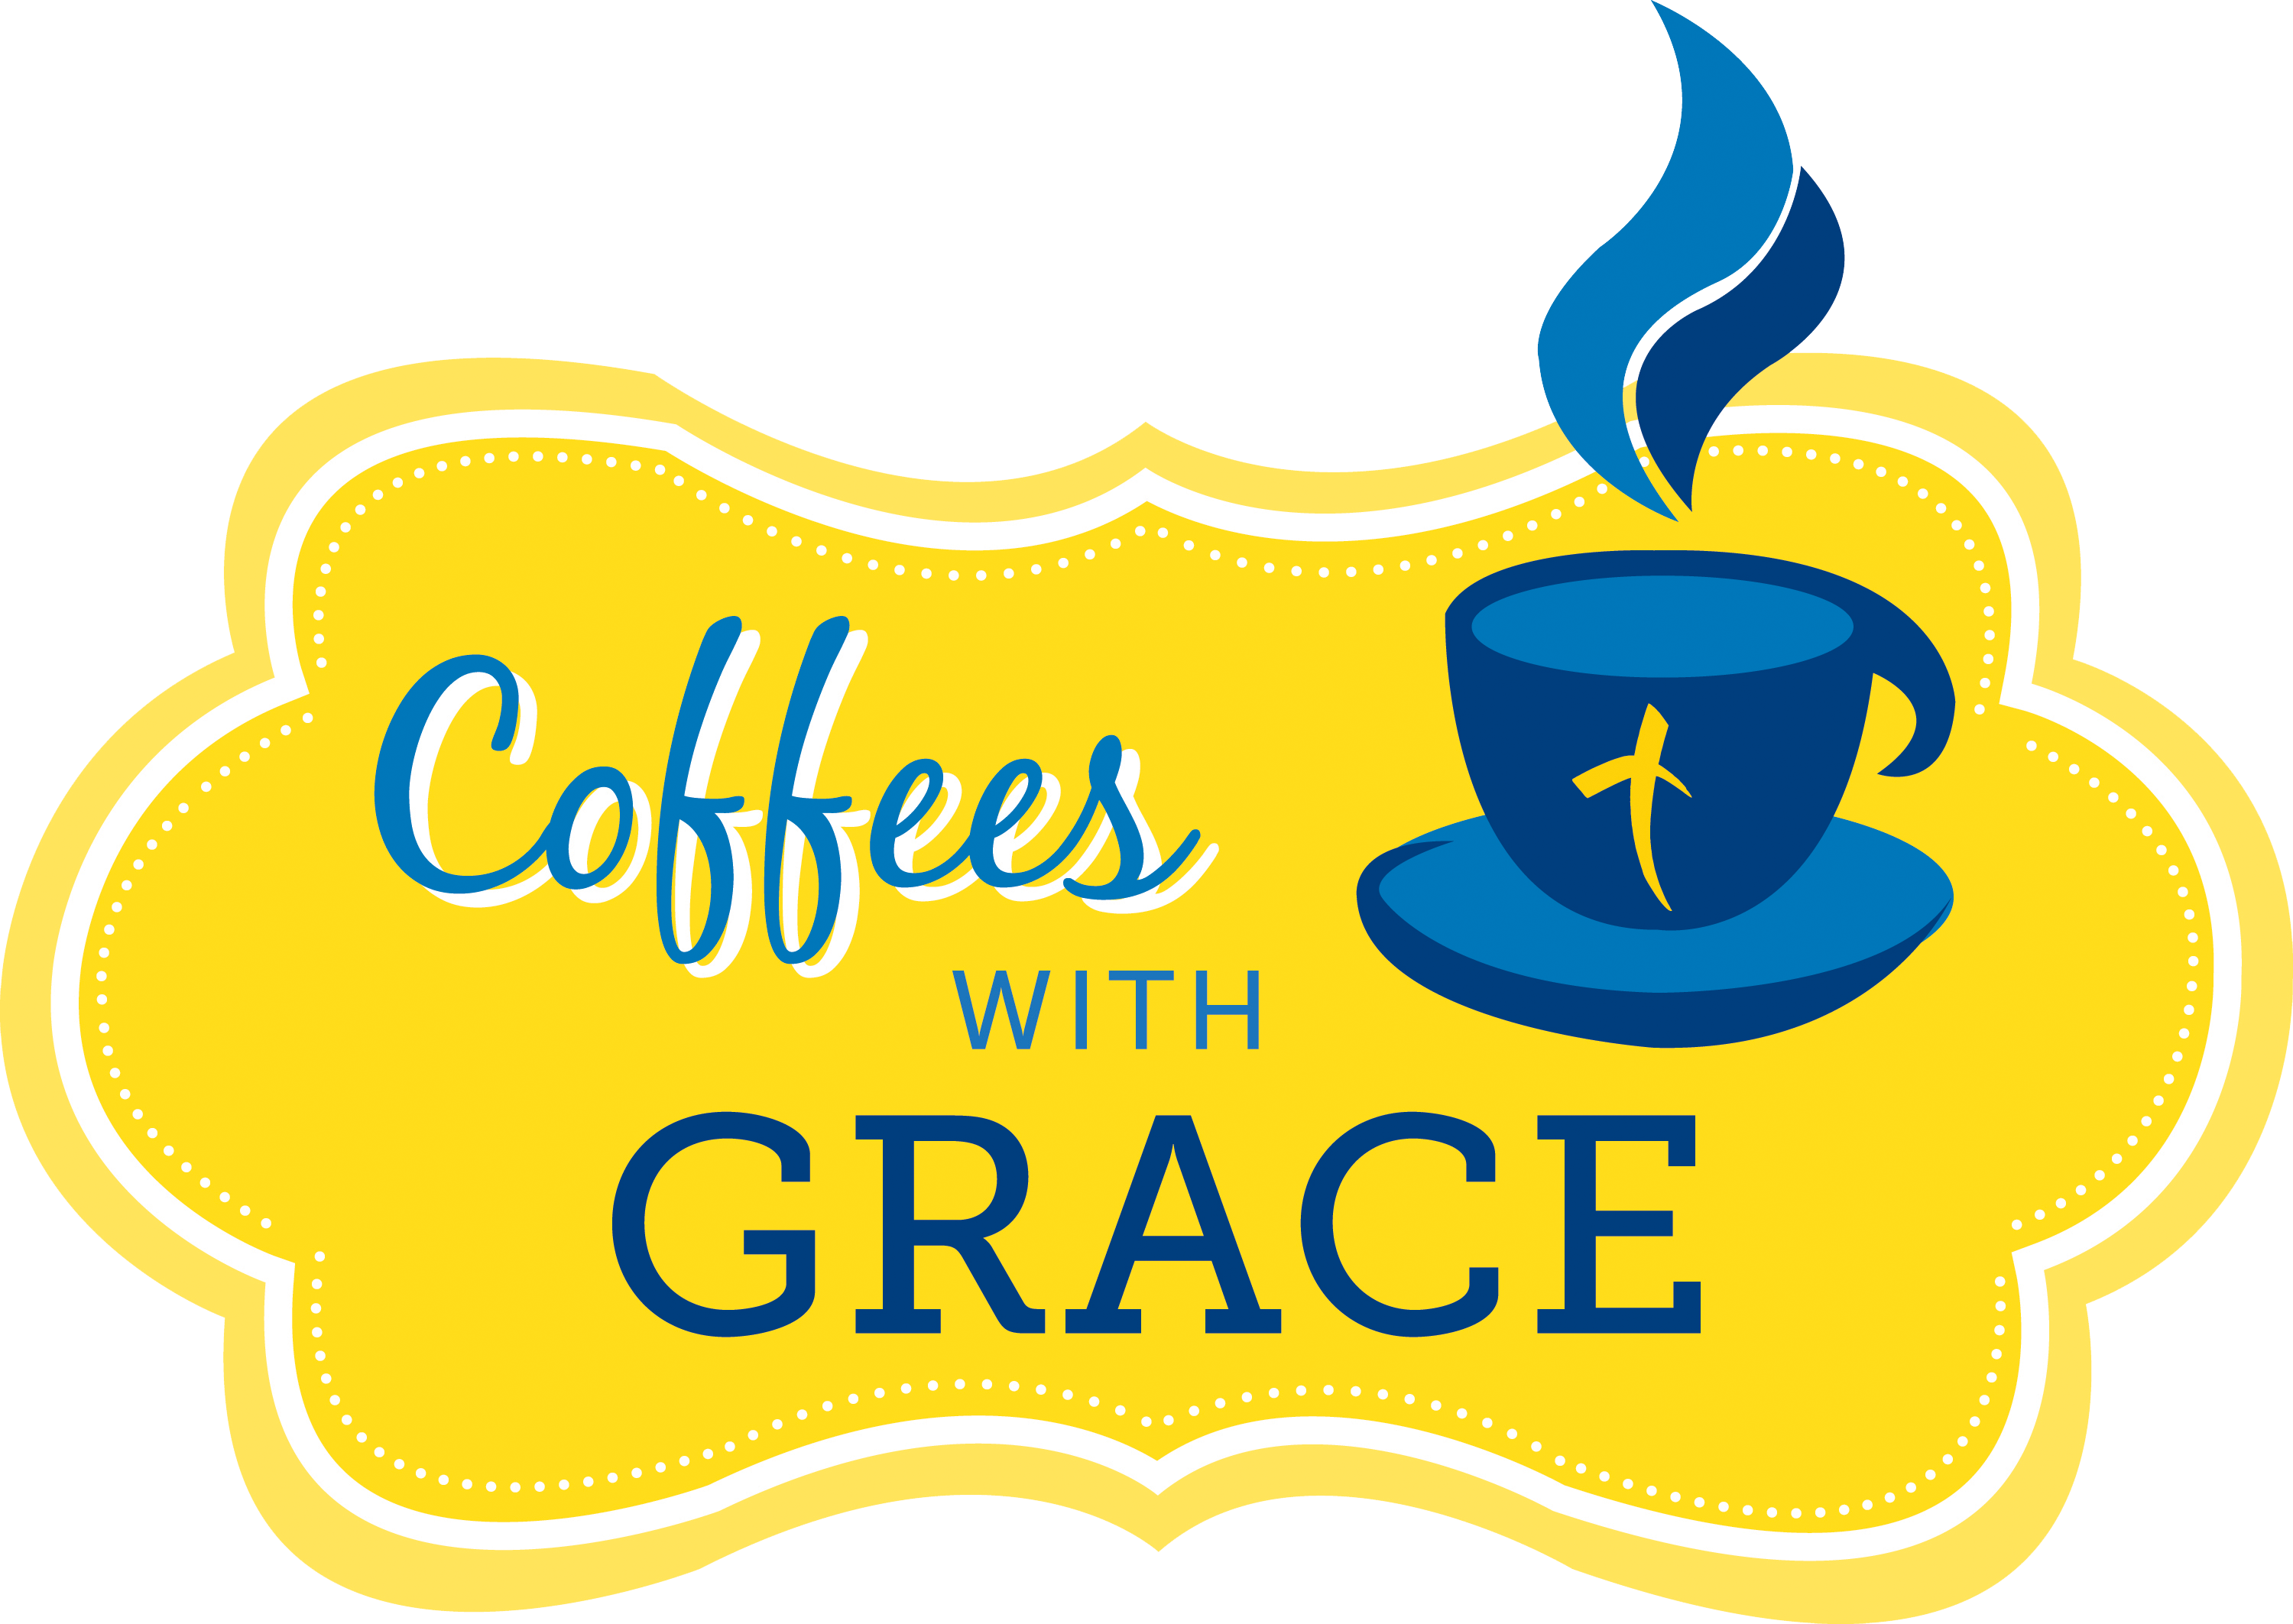 Coffees With Grace Are Open-ended Conversations With - Spirit Airlines (3000x2125)